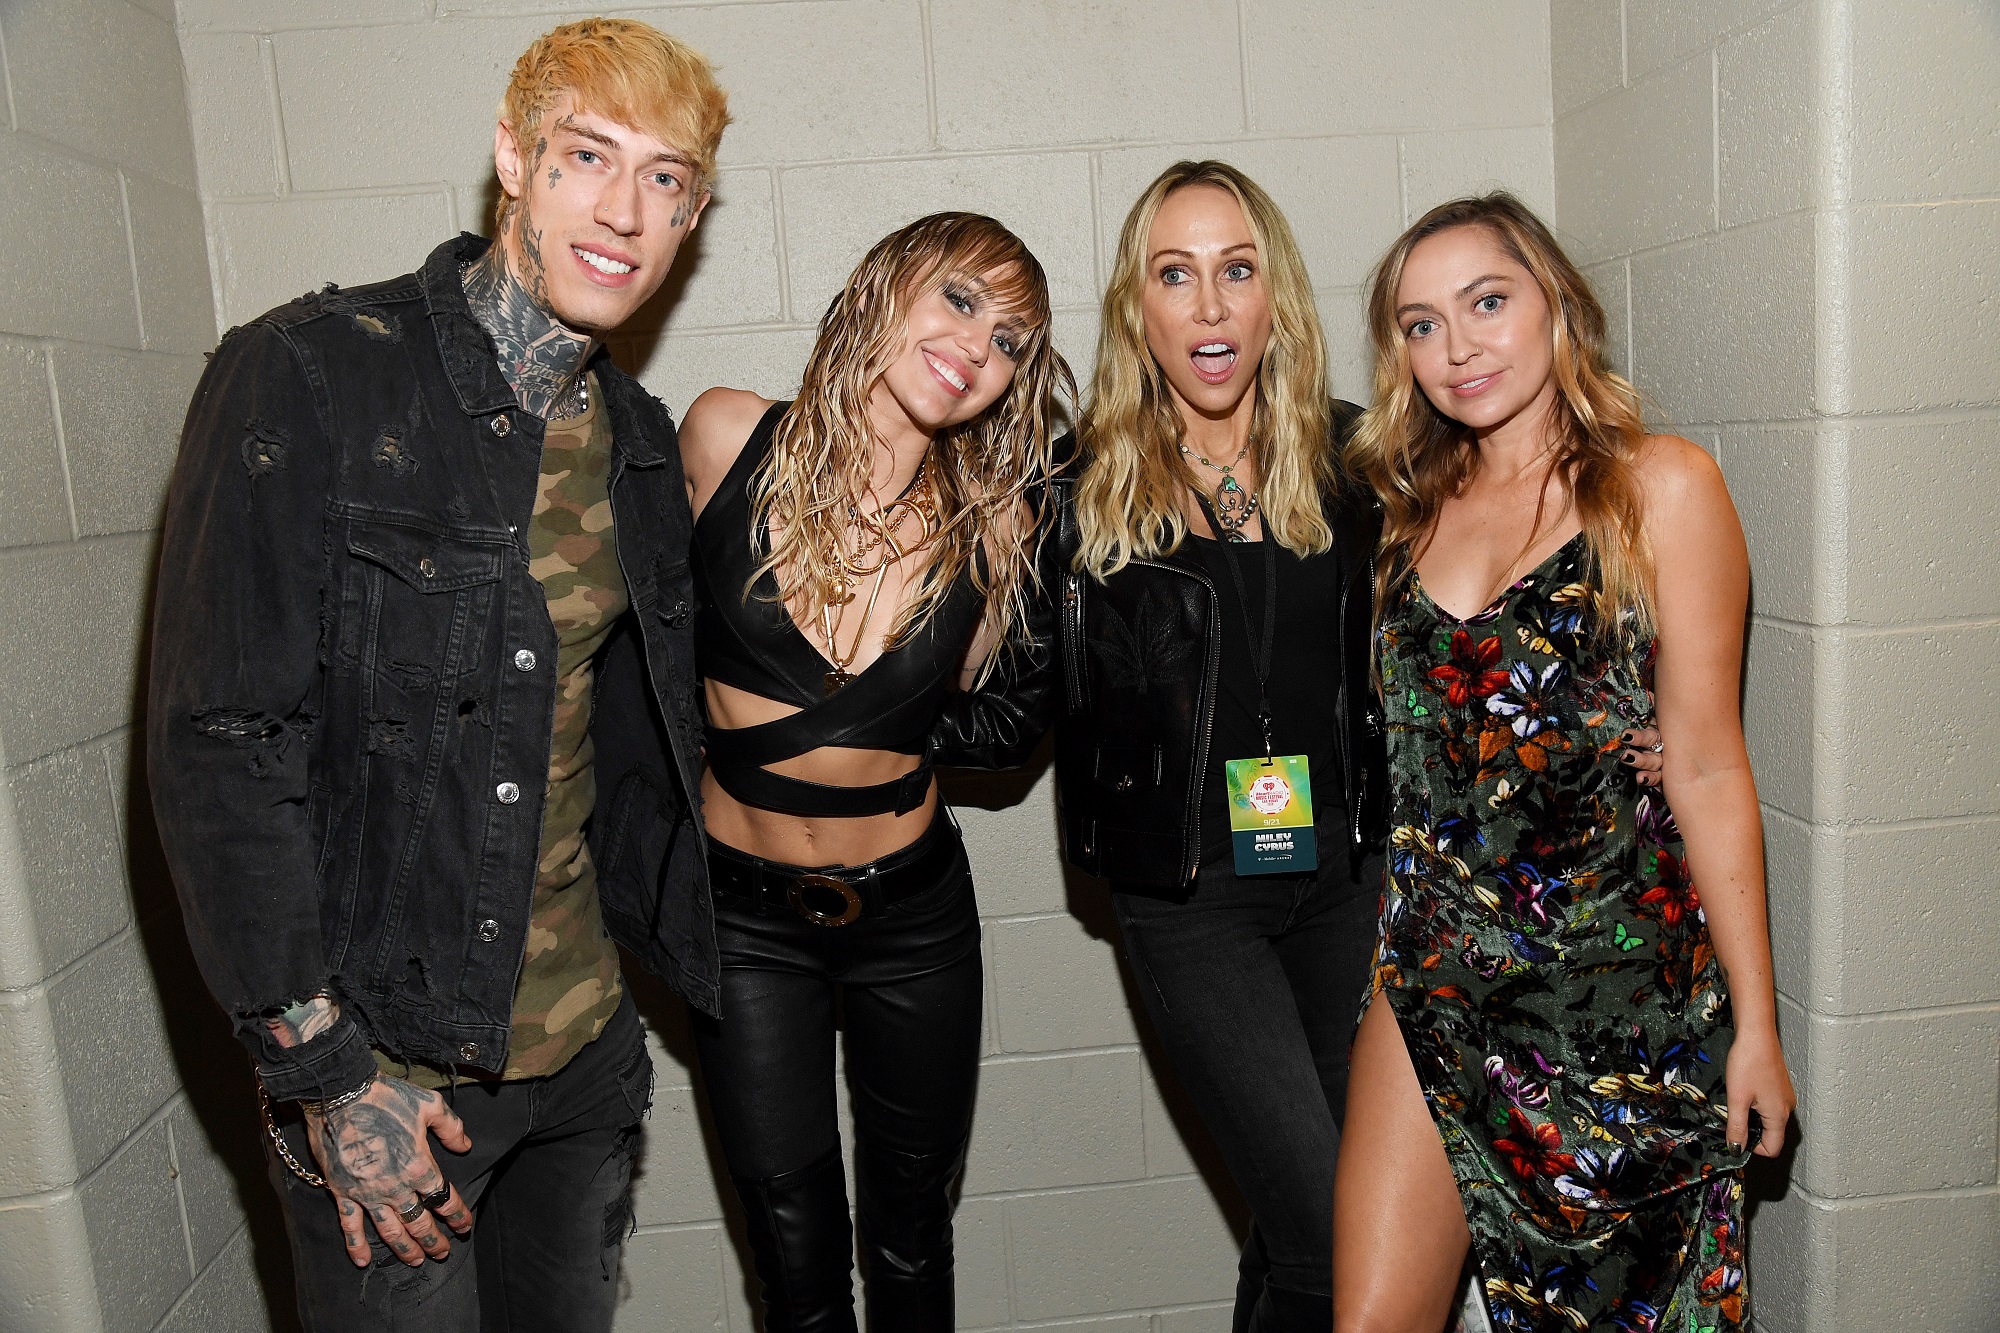 (L-R) Trace Cyrus, Miley Cyrus, Tish Cyrus, and Brandi Cyrus pose backstage during the 2019 iHeartRadio Music Festival on September 21, 2019, in Las Vegas, Nevada.